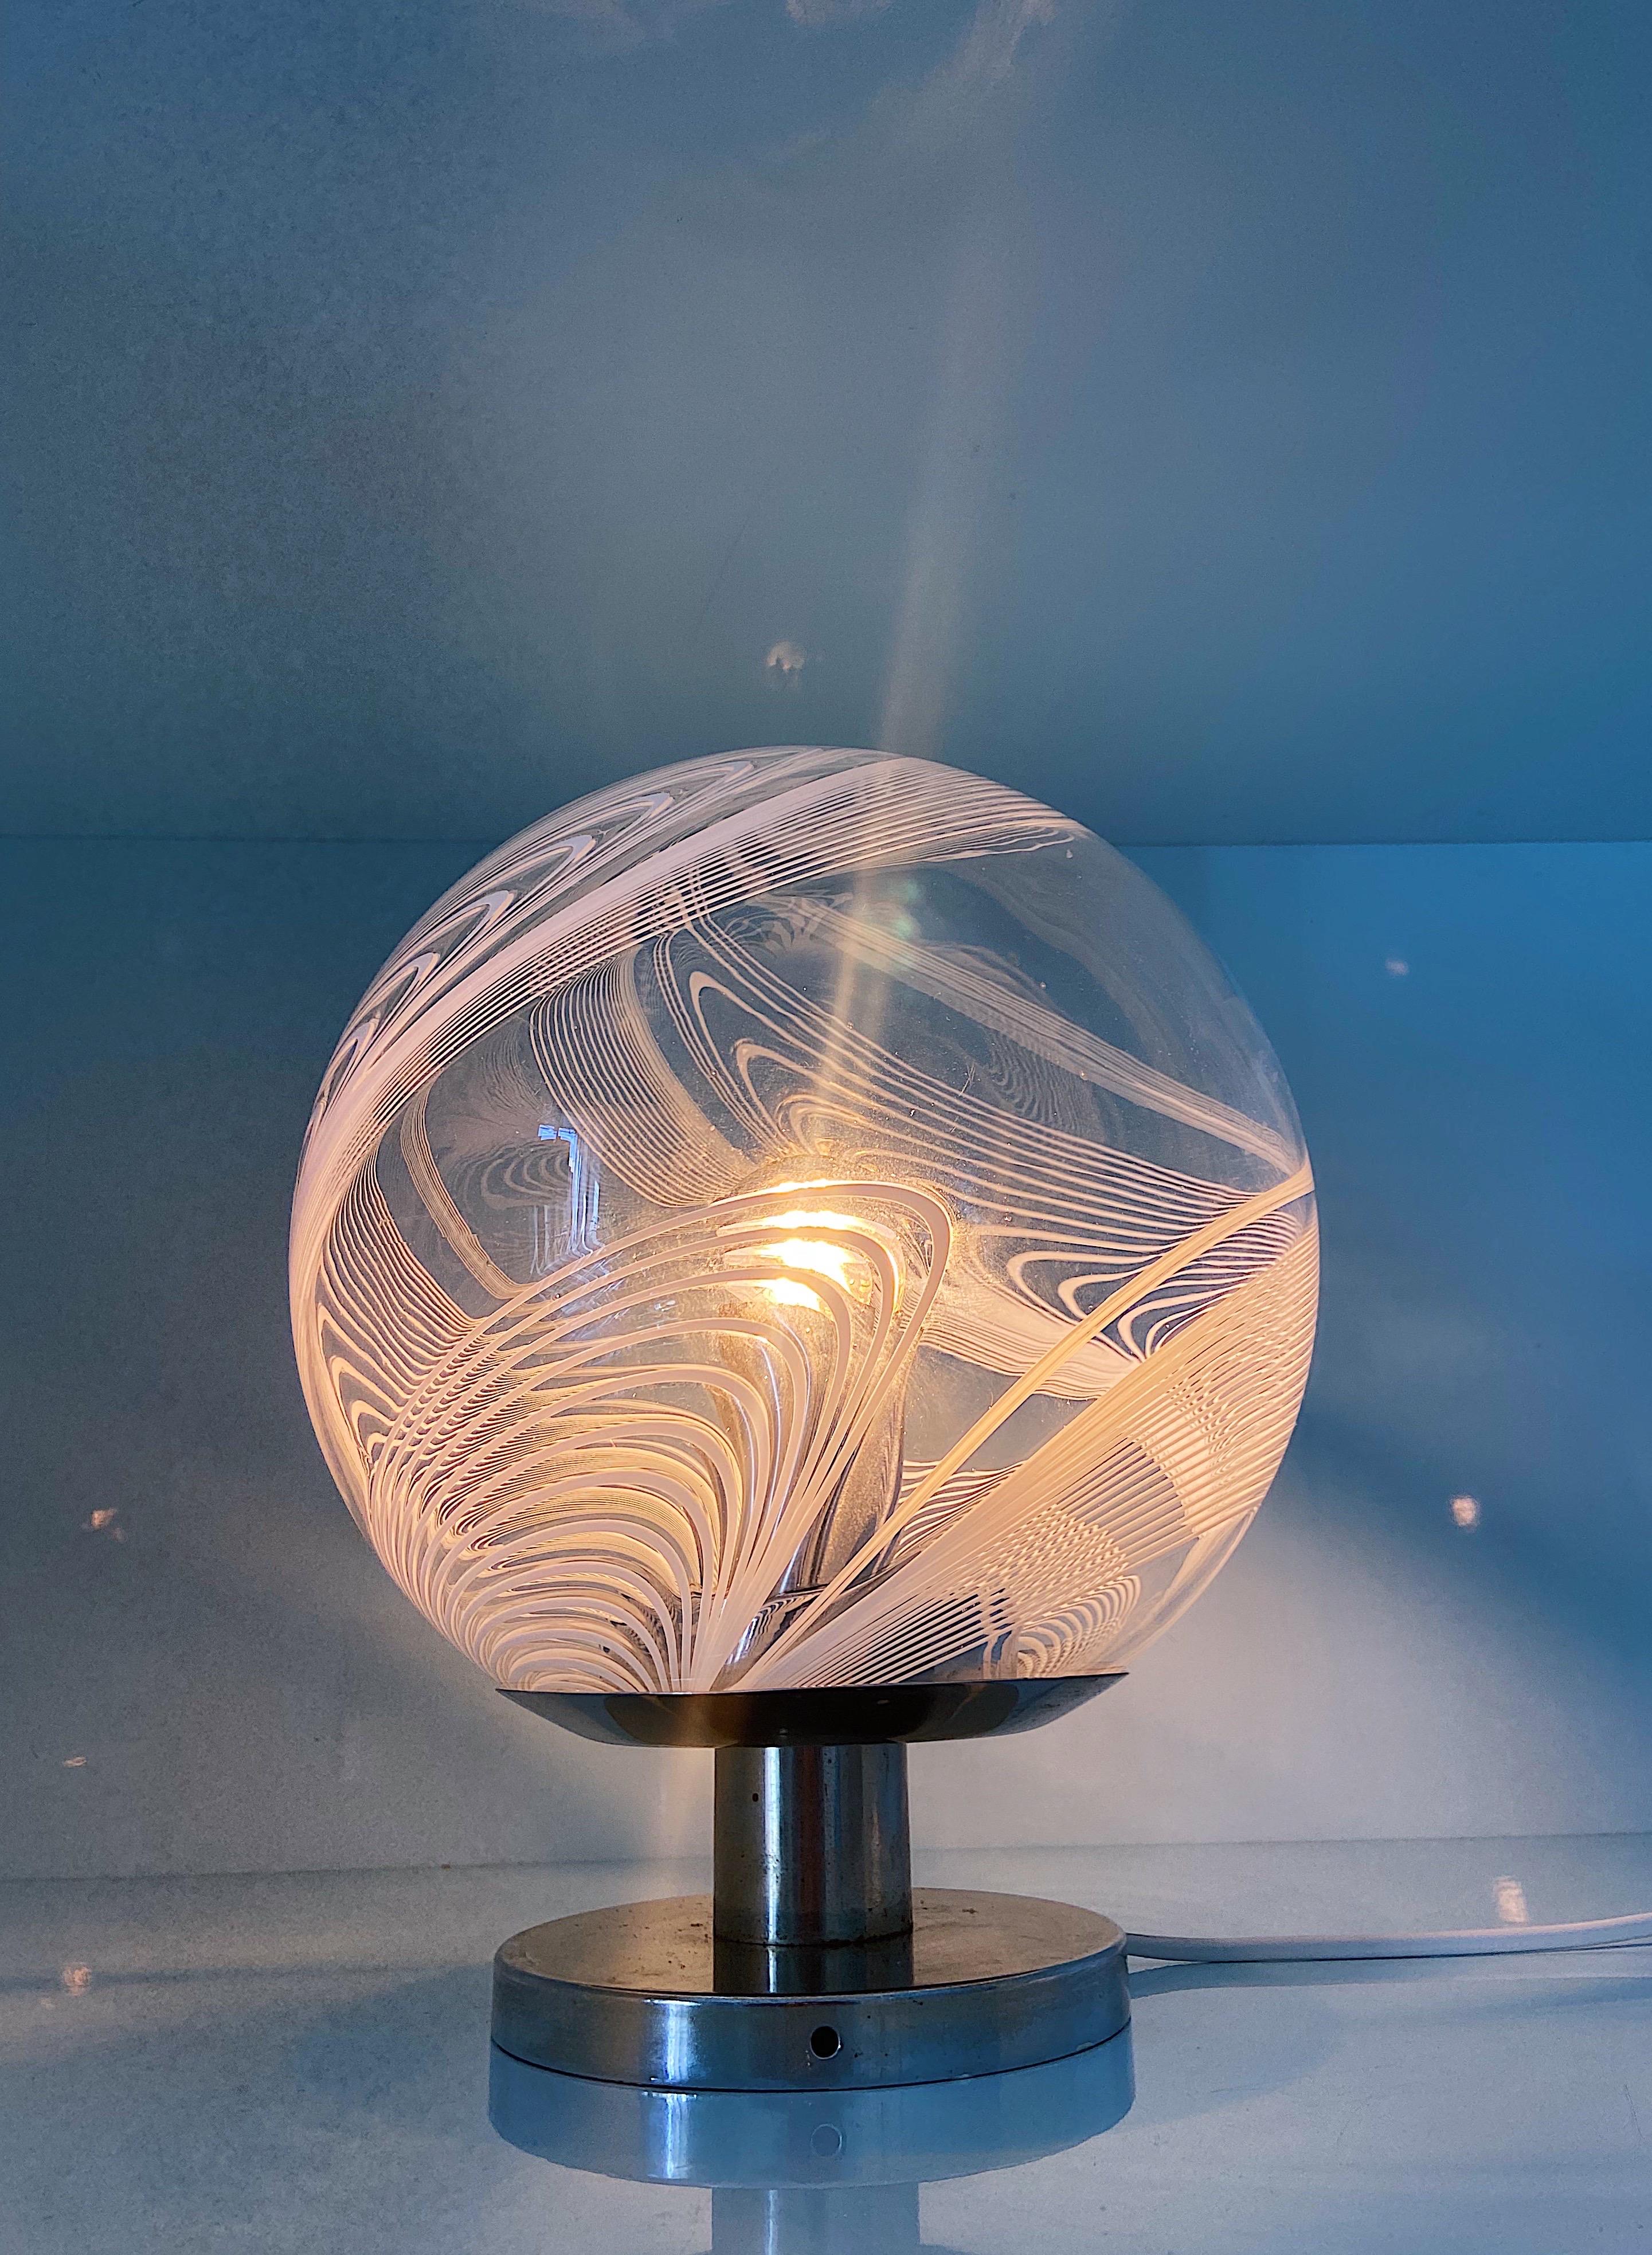 Stunning and rare Murano glass table lamp by Venini, 1970s.
The glass is transparent with a white irregular swirl decor.

Details
Creator: Venini, Murano
Dimensions: Height: 30 cm Width: 28 cm
Materials and Techniques: Glass, Metal
Place of